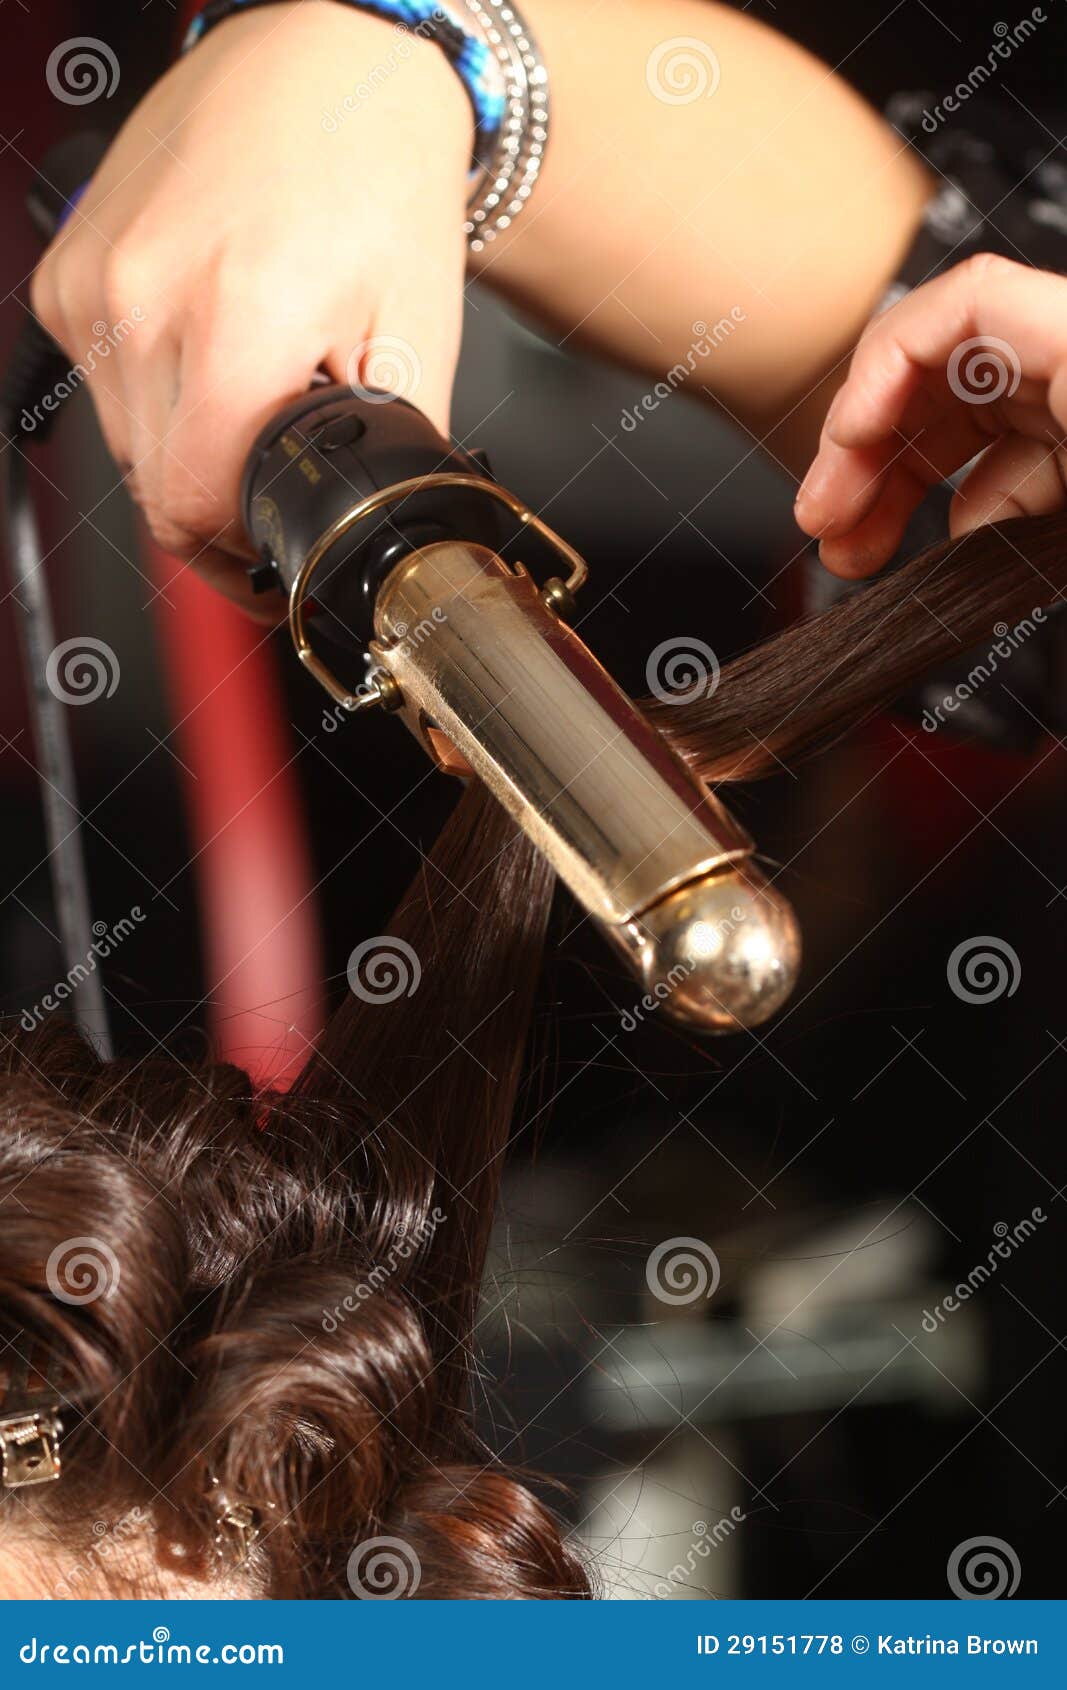 working hairstylist curling hair in a salon